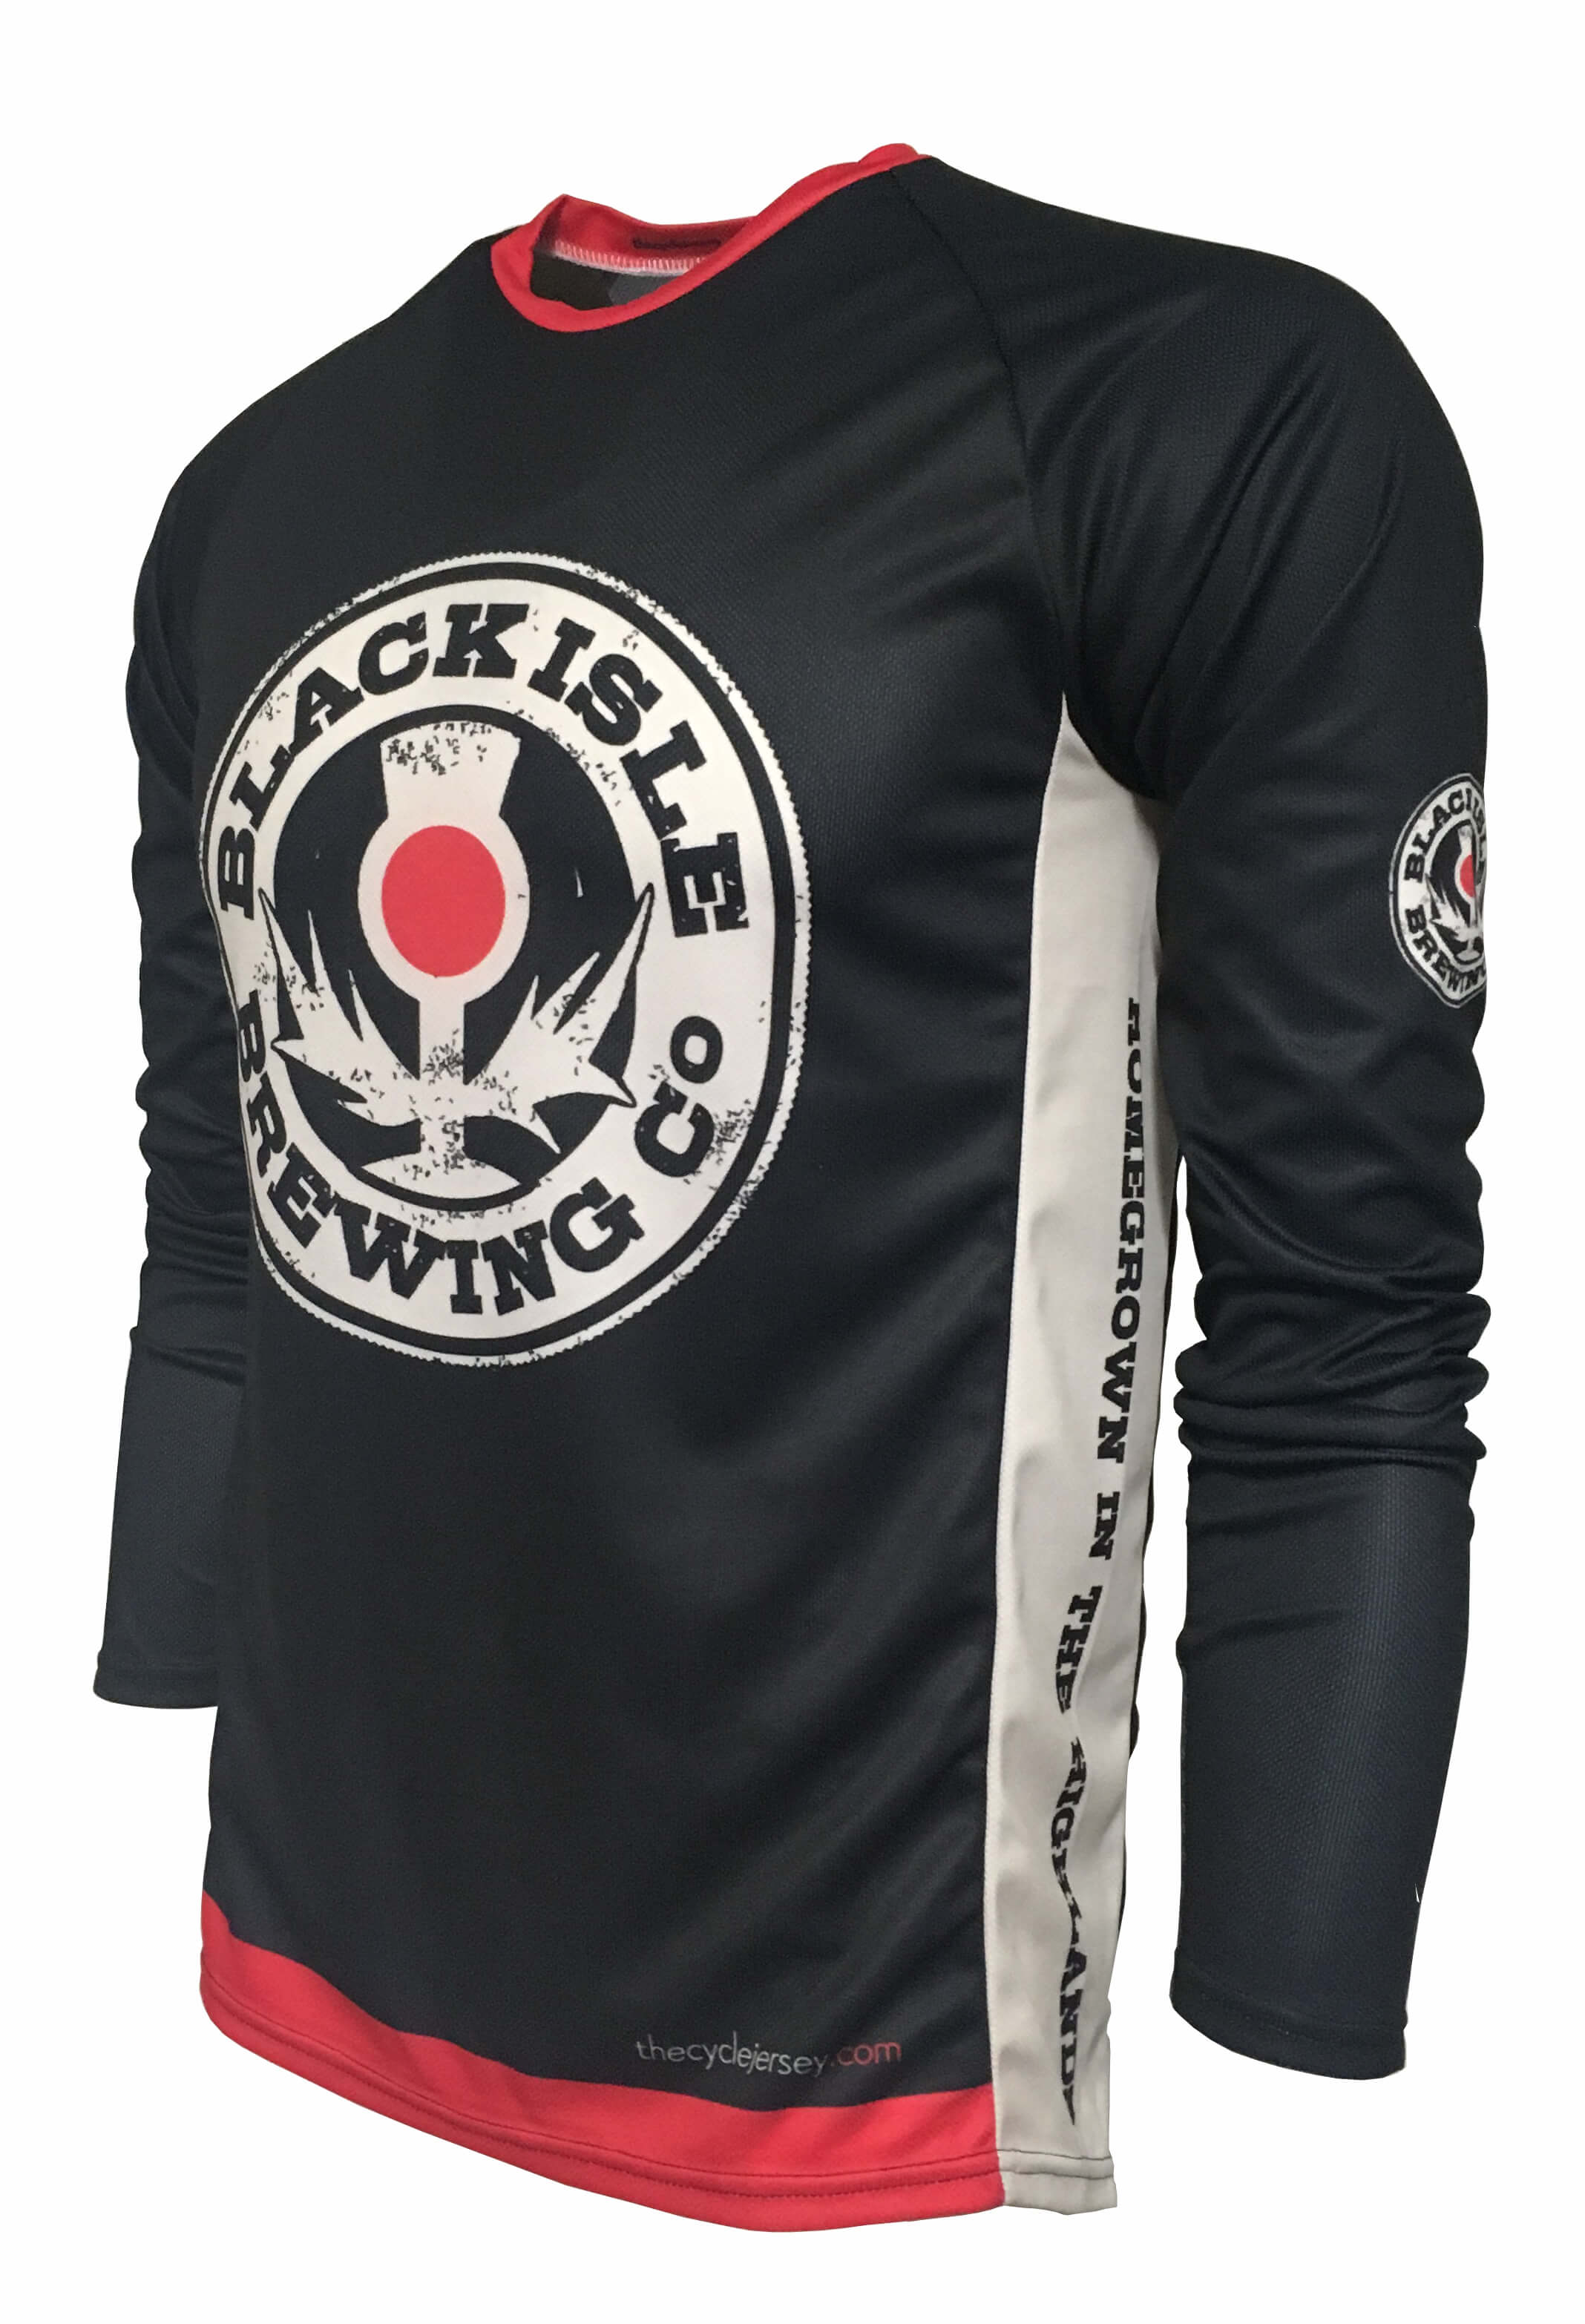 Black Isle Brewery Enduro Cycle Jersey Front